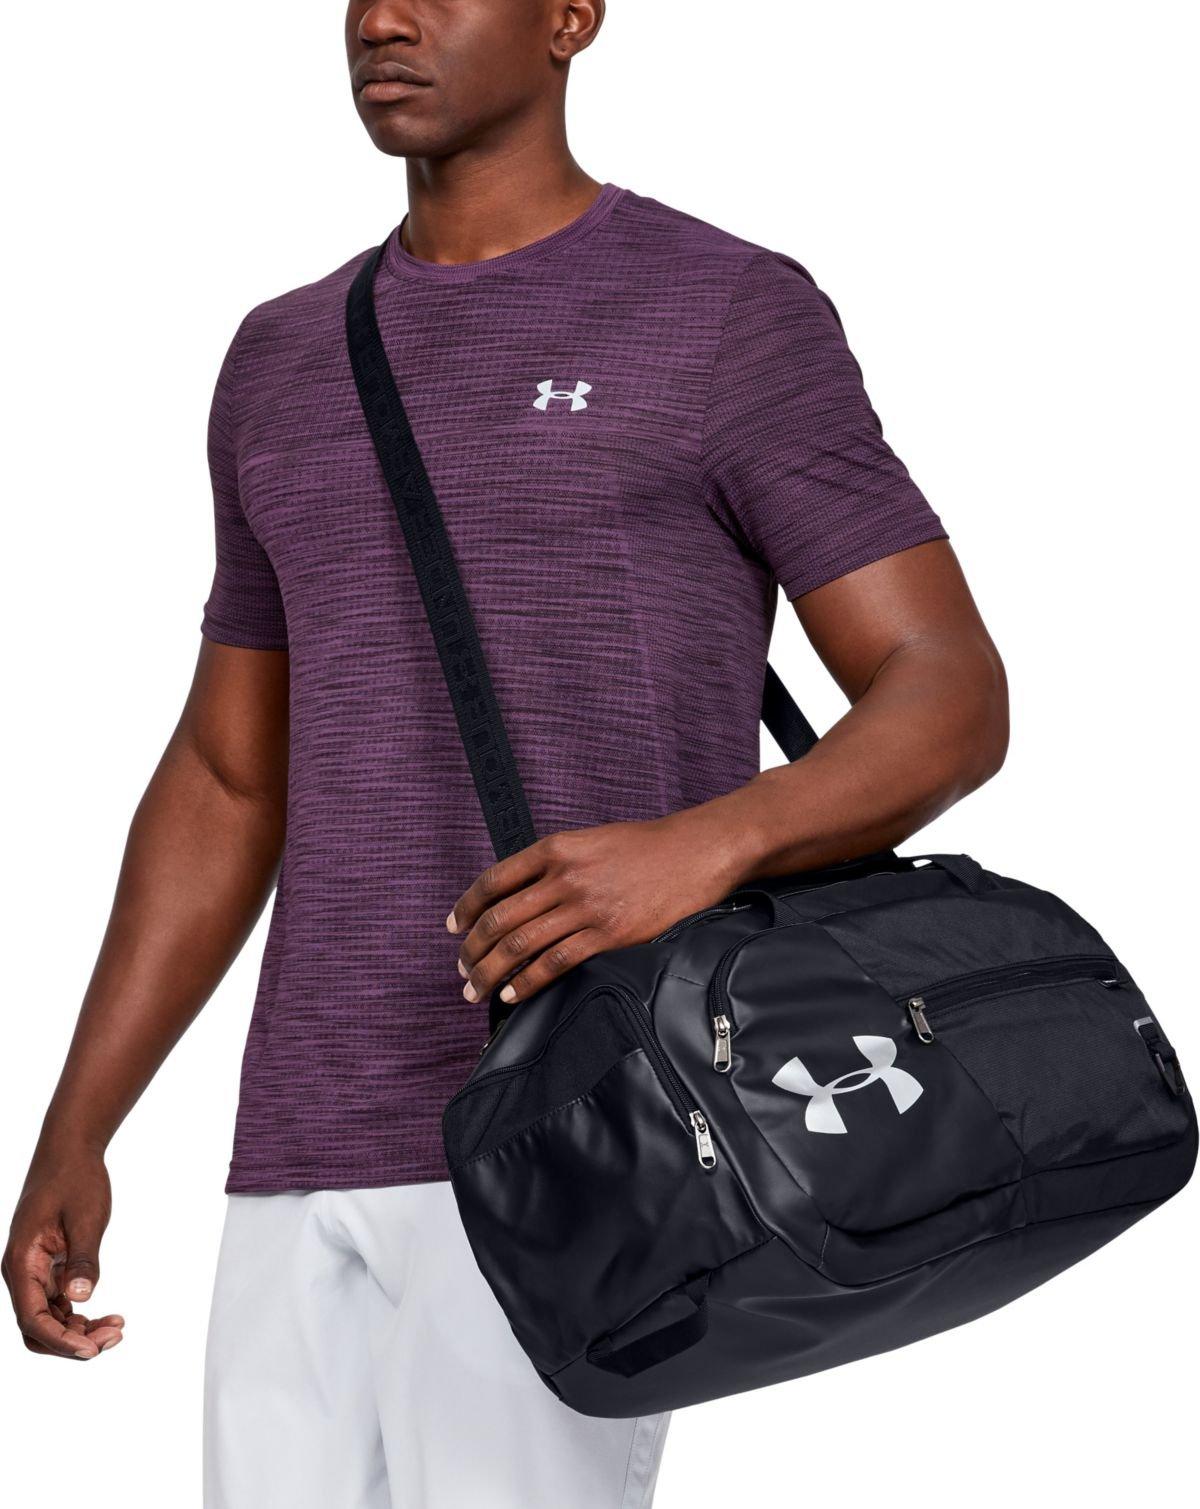 Under Armour Undeniable 4.0 Small 